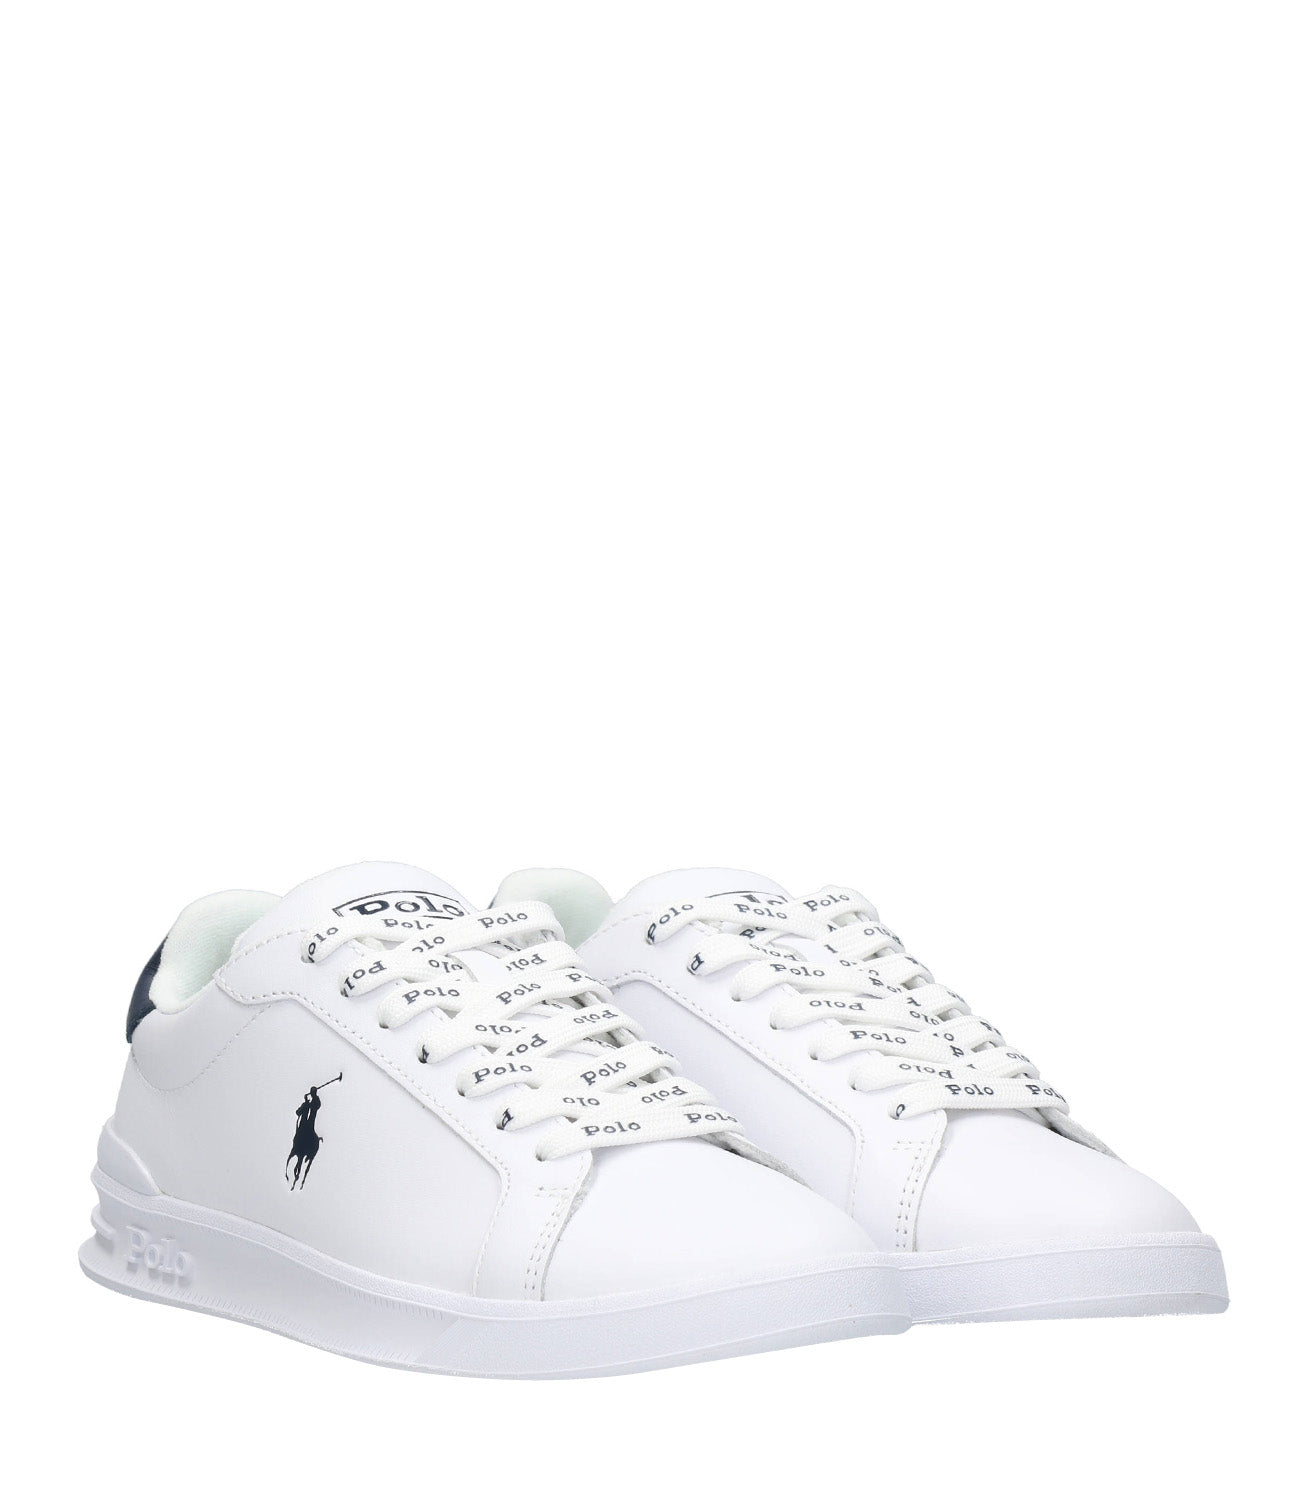 Polo Ralph Lauren | Heritage Court II Sneaker White and Navy Blue